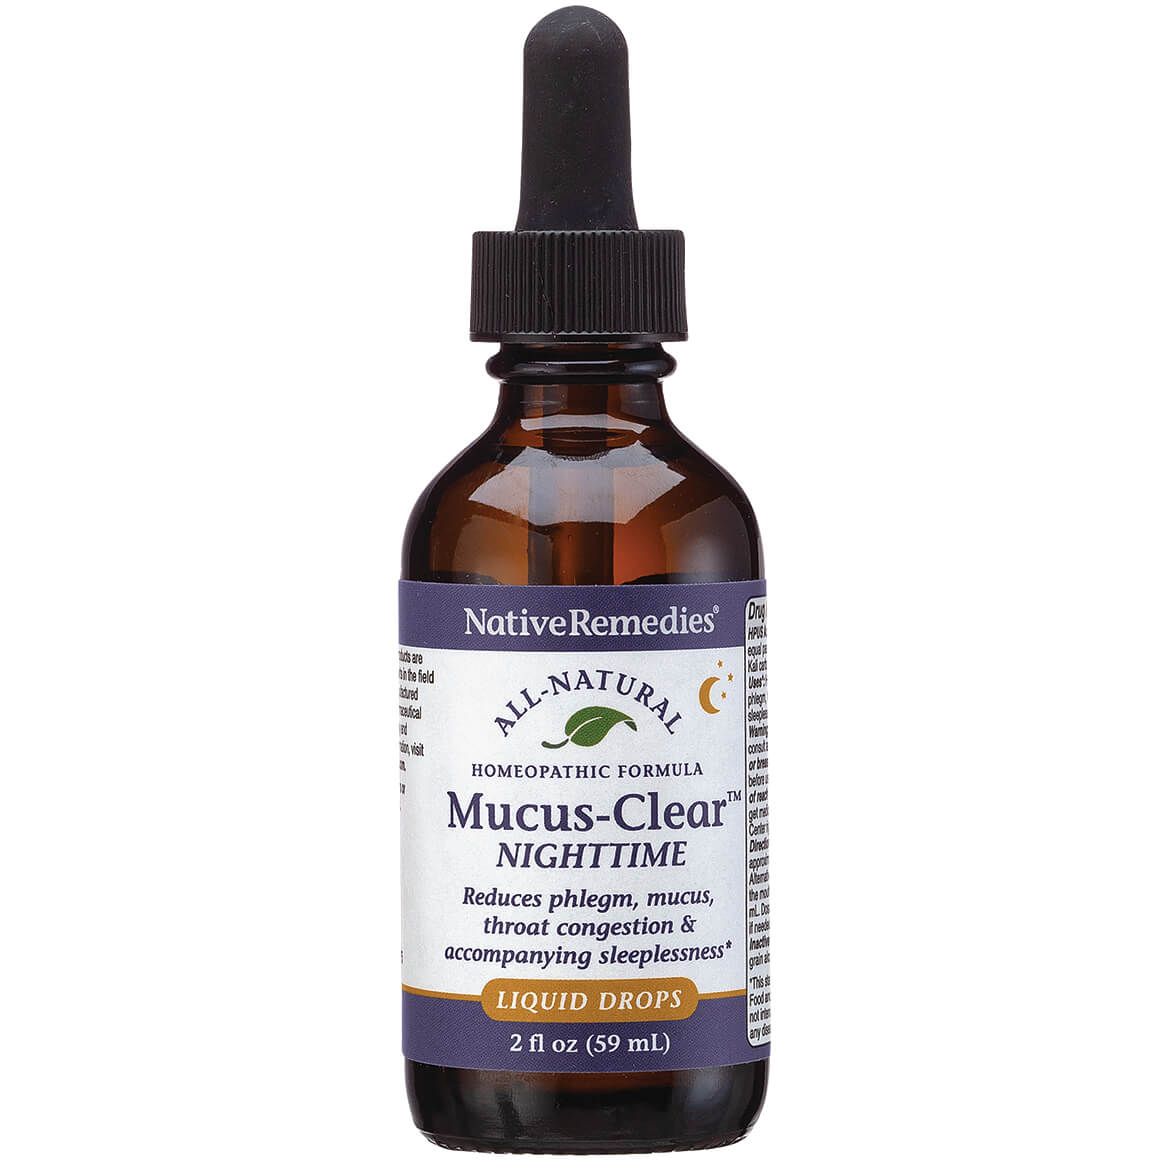 Mucus-Clear™ Nighttime for Nighttime Phlegm & Congestion + '-' + 367338